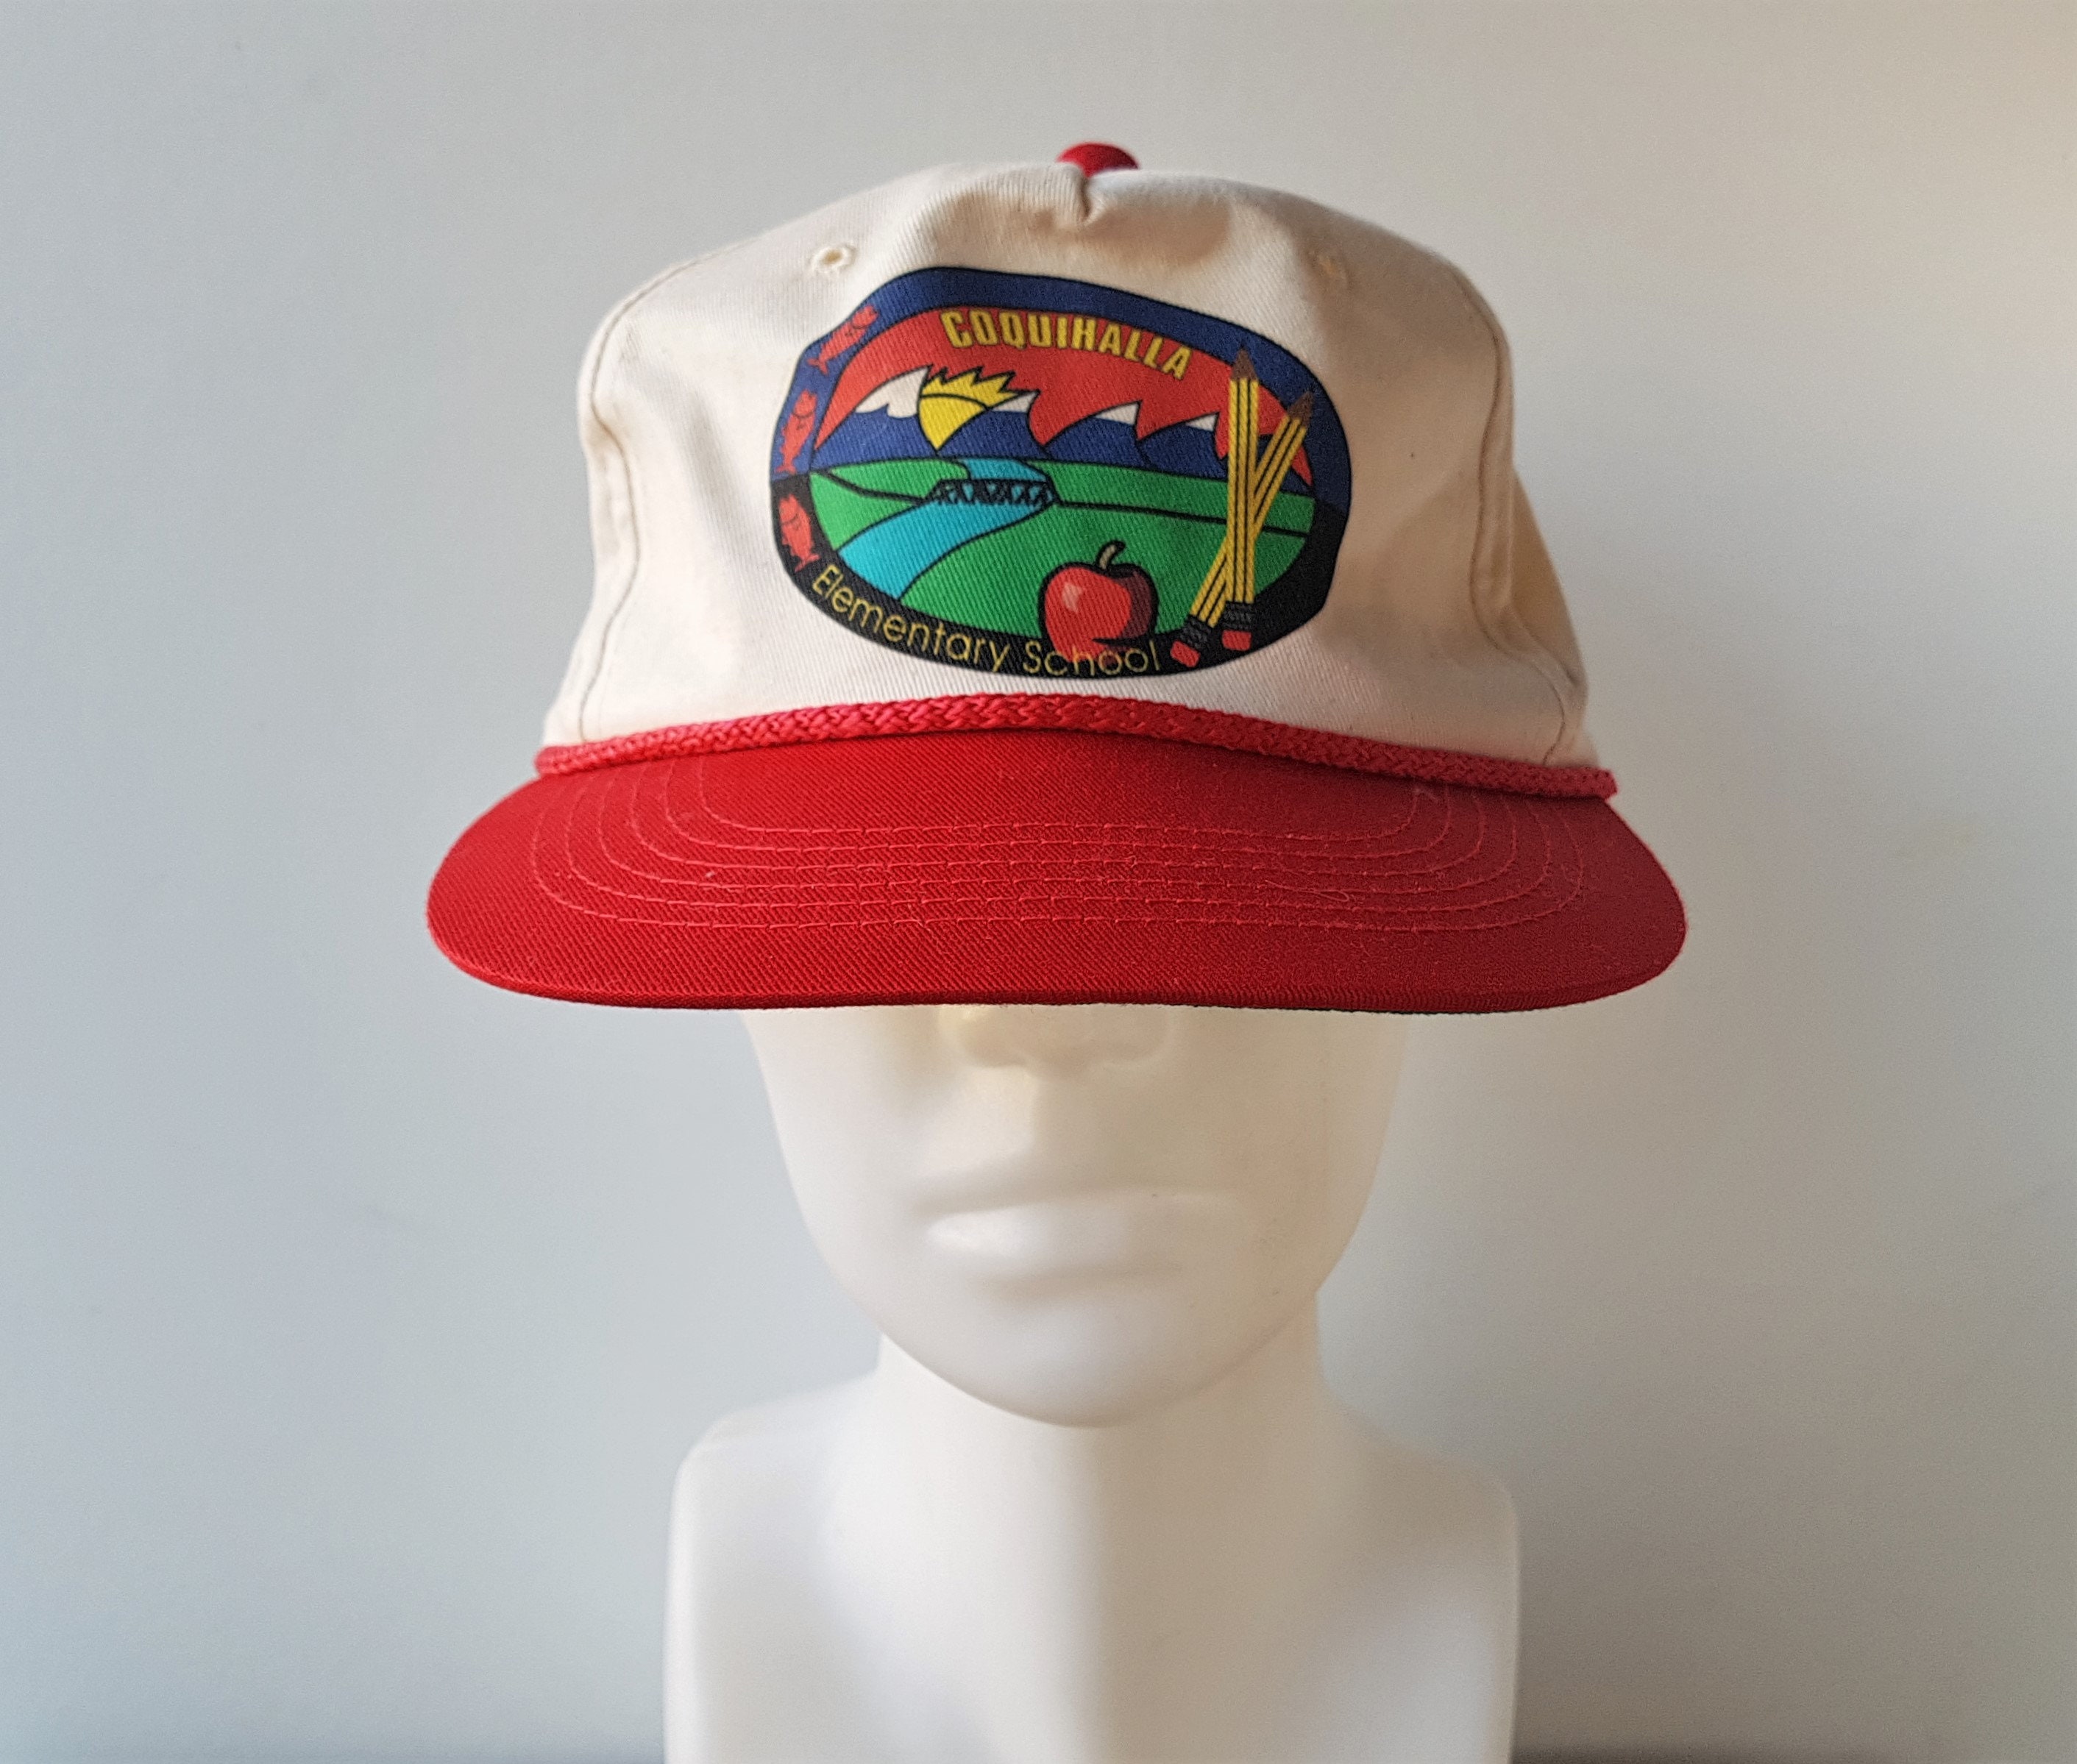 Vintage 90s COQUIHALLA ELEMENTARY SCHOOL Strapback Hat Red Rope Lined  Cotton Duck Cap Rear Leather Strap Adult Adjustable Ajm Headwear -   Canada